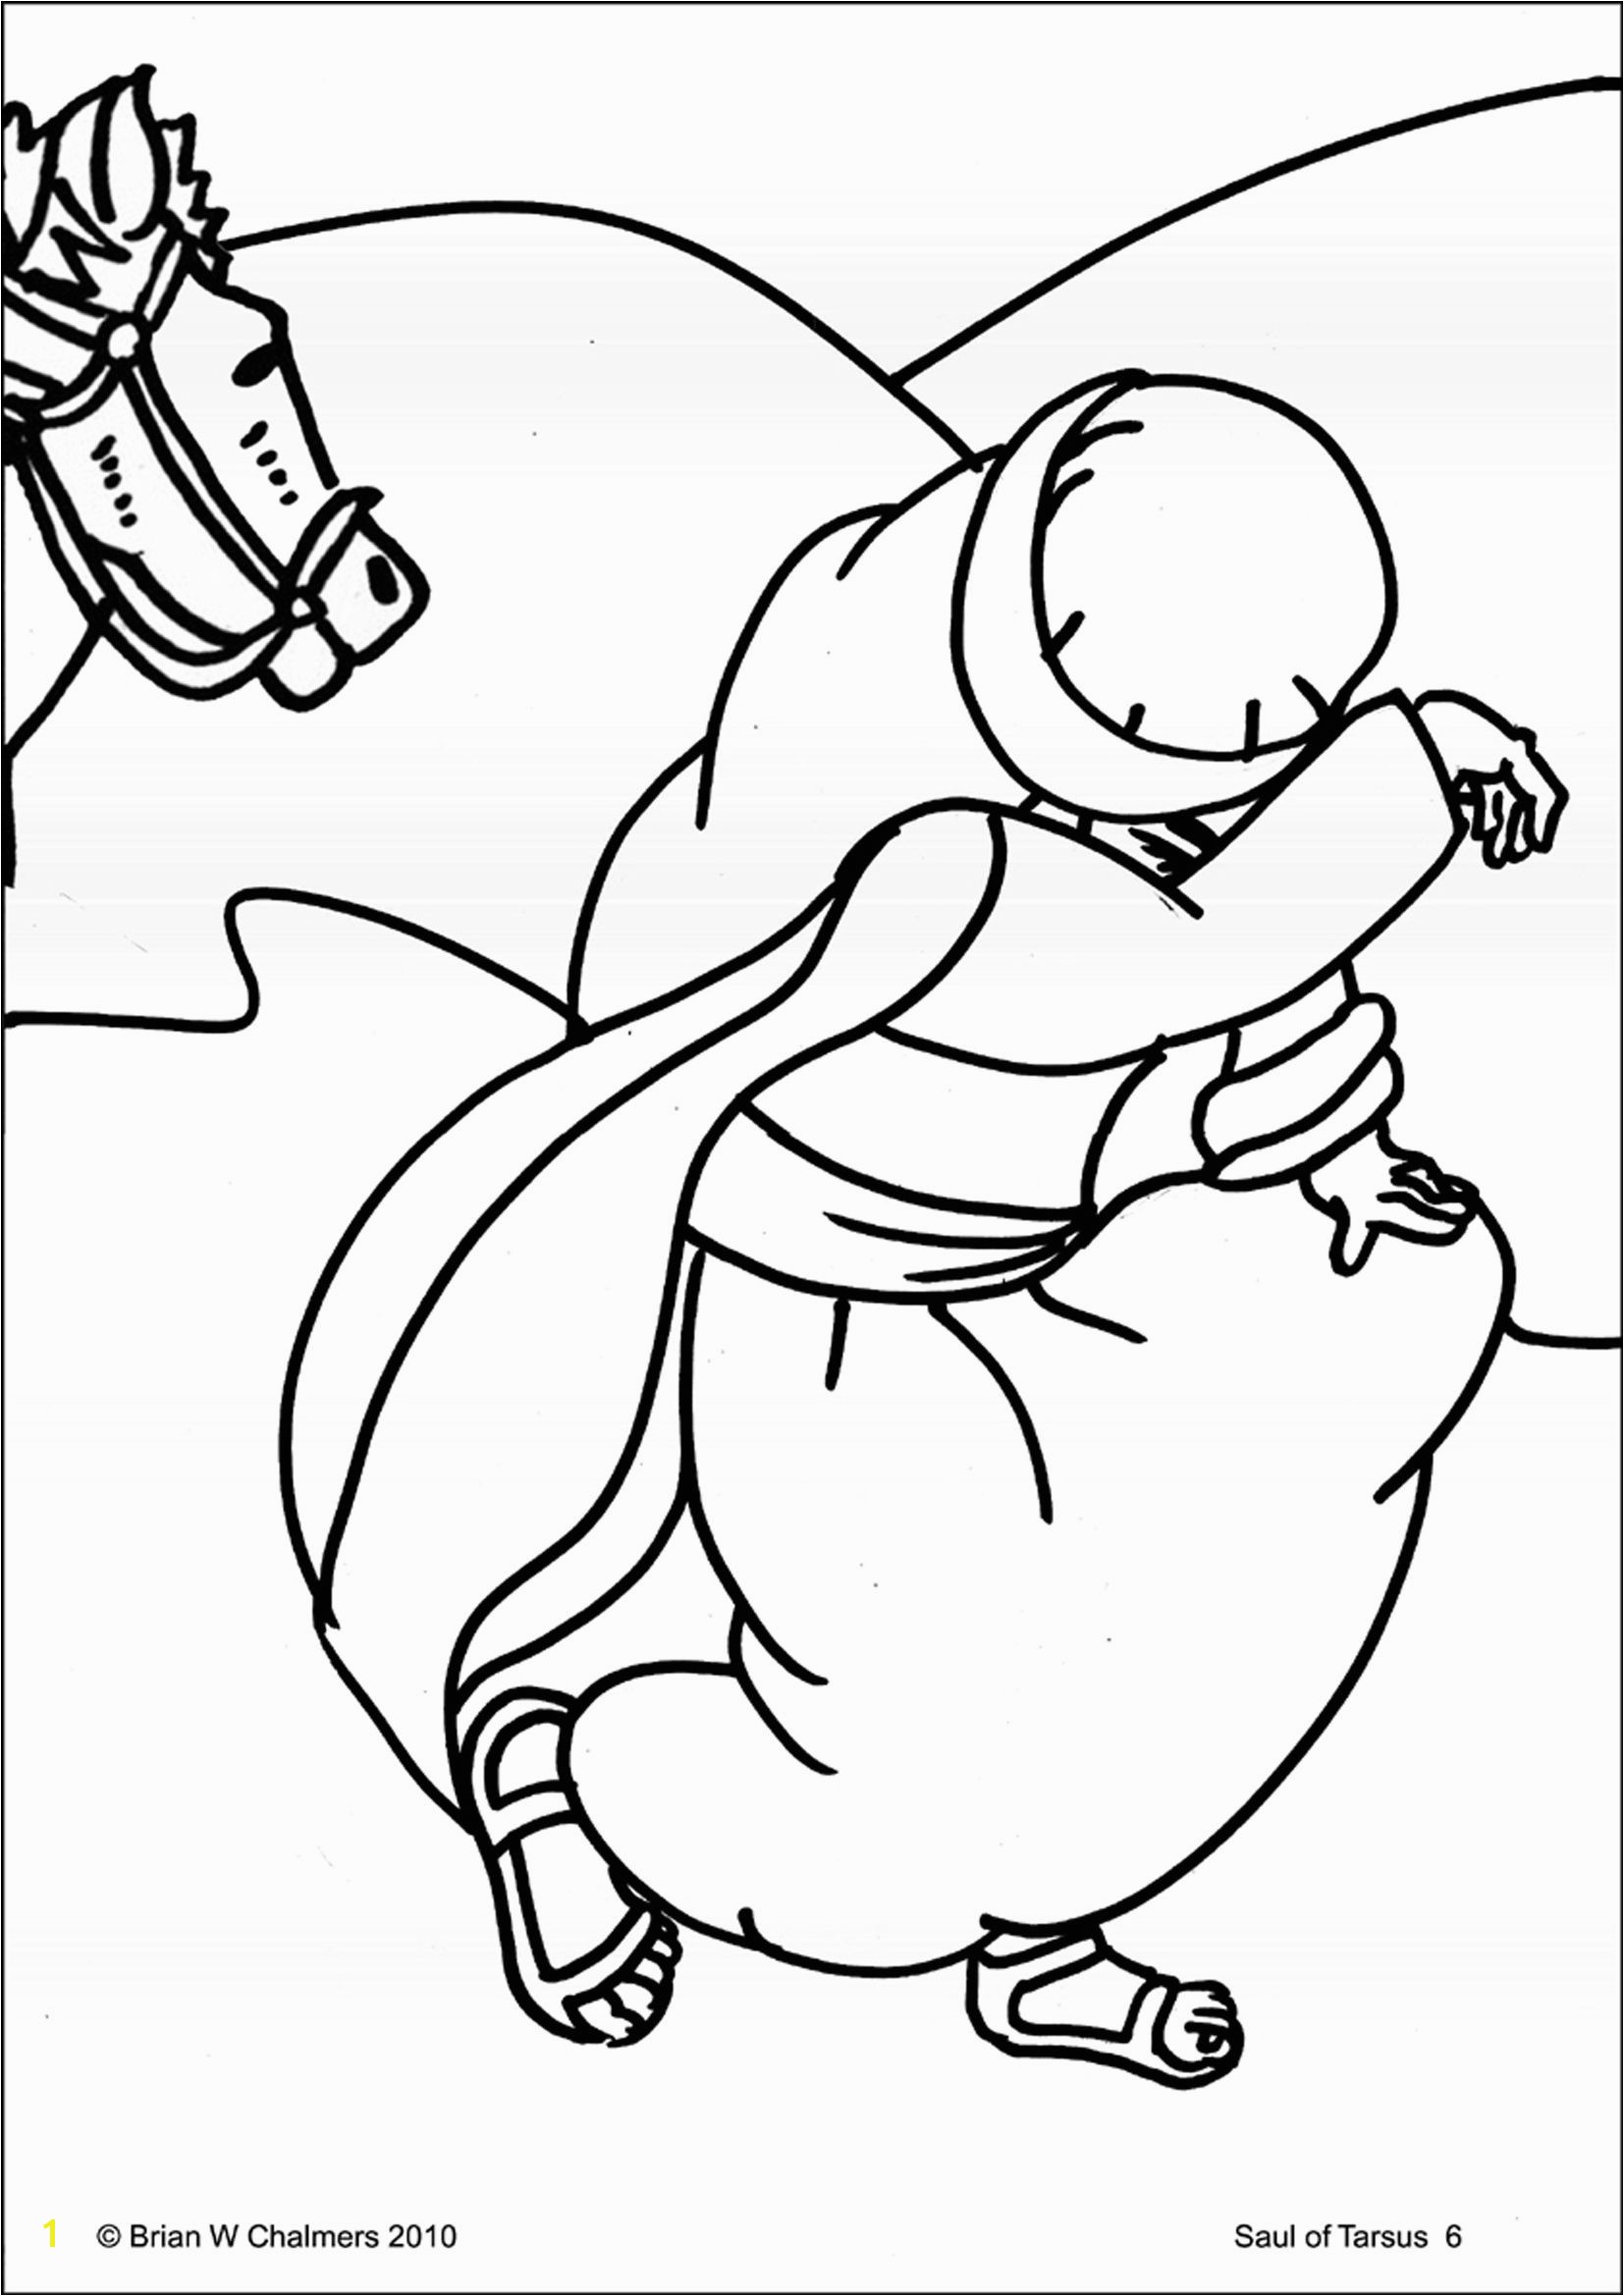 Early Church Coloring Page Day 1 Acts 9 Coloring Sheet Extra Activity for Early Finishers